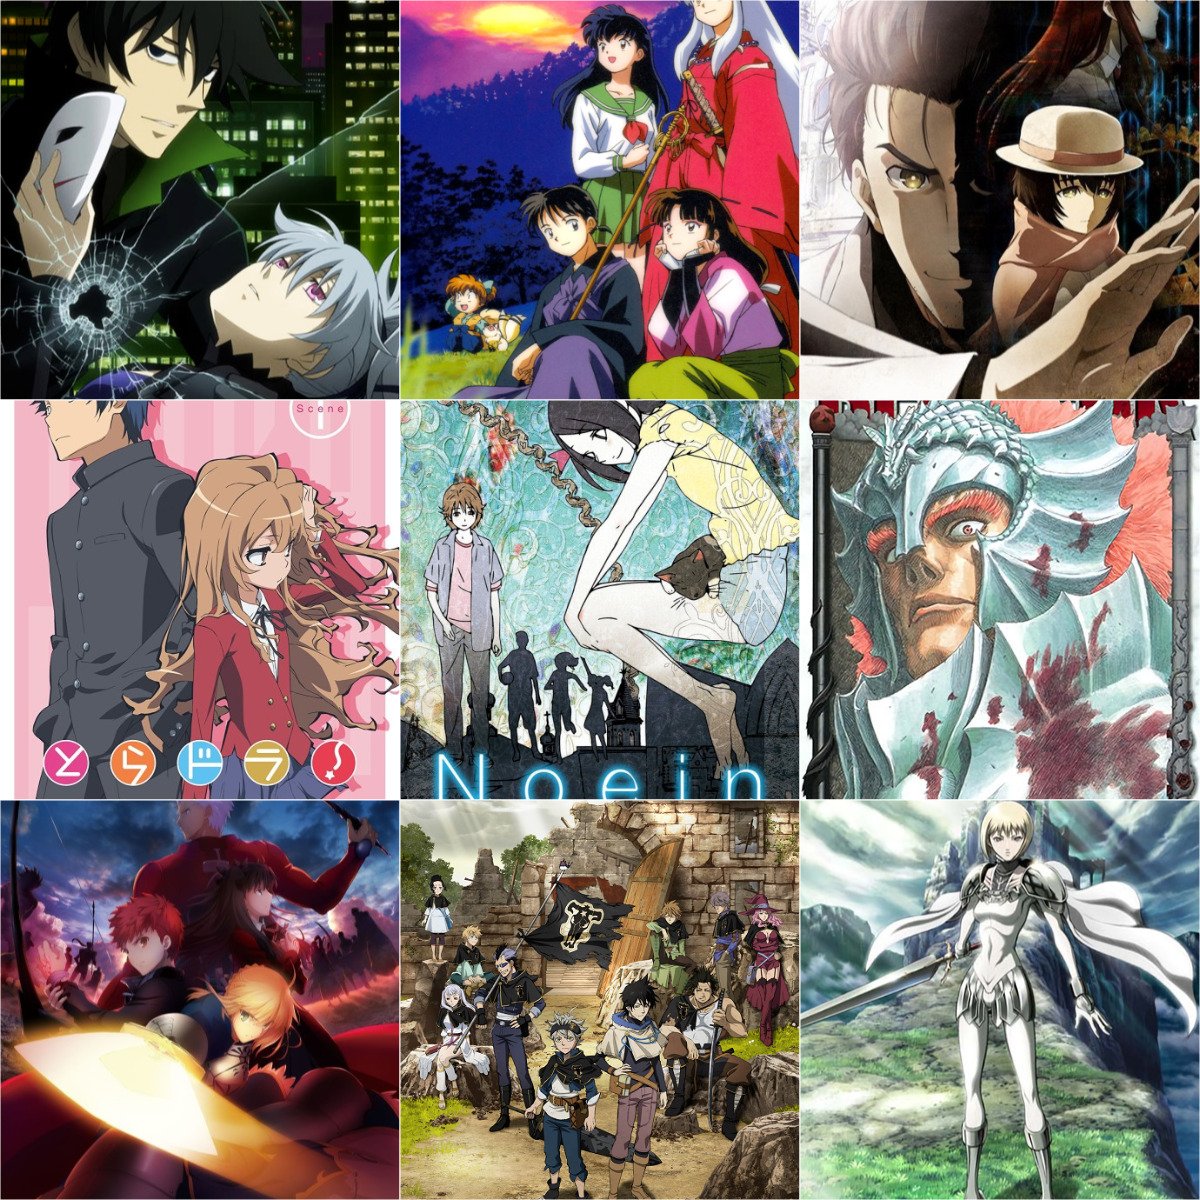 Post your anime 3x3 - Anime Discussion - Anime Forums